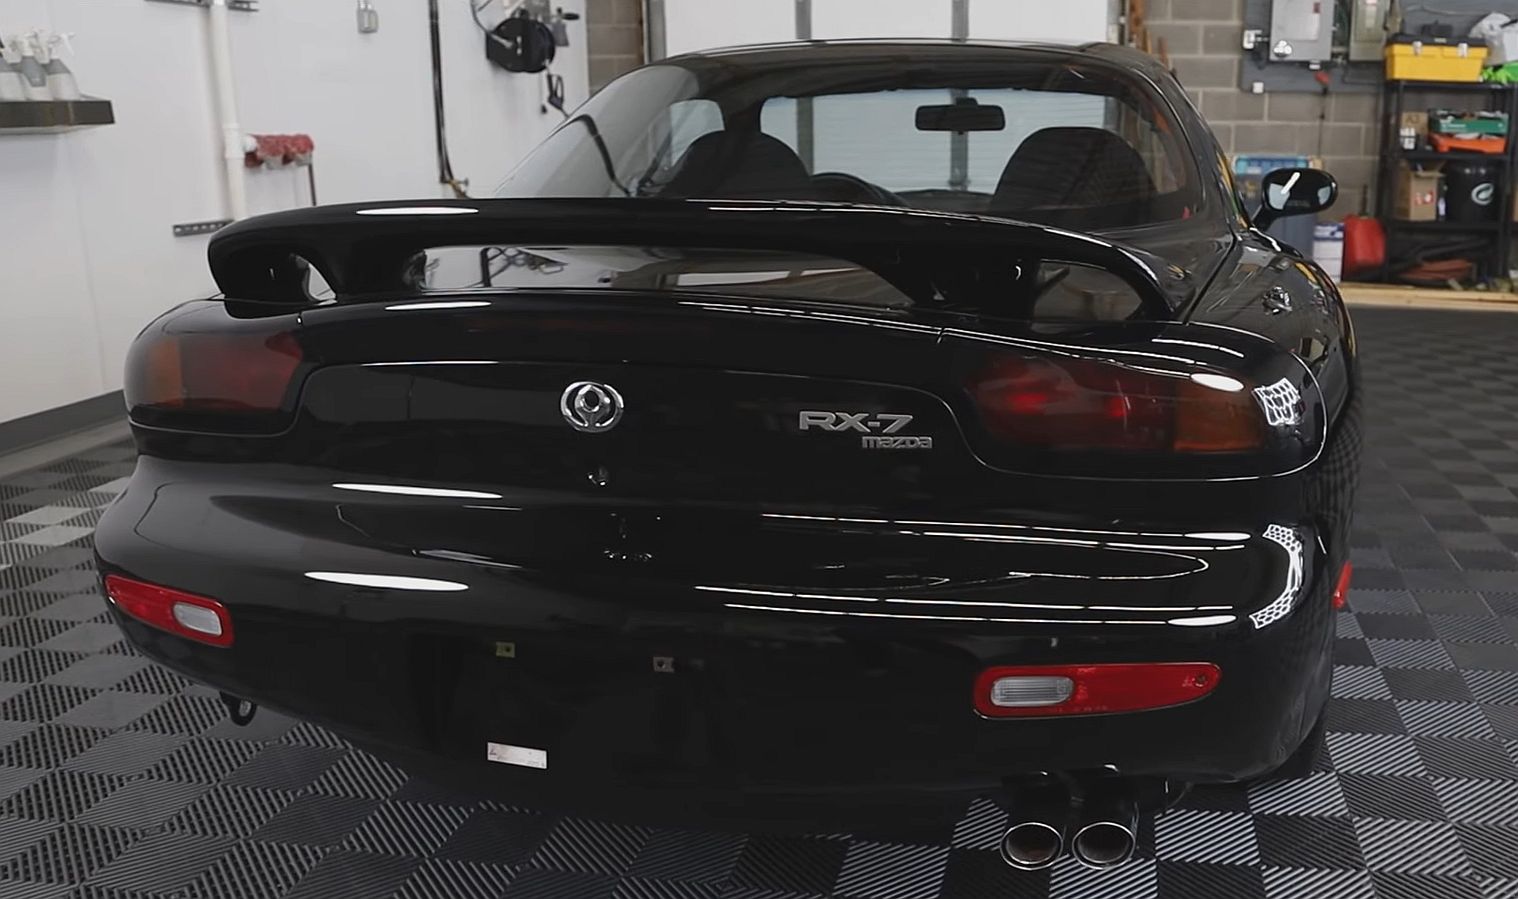 Barn find FD Mazda RX-7 R2 with 8,800 miles washed for the first